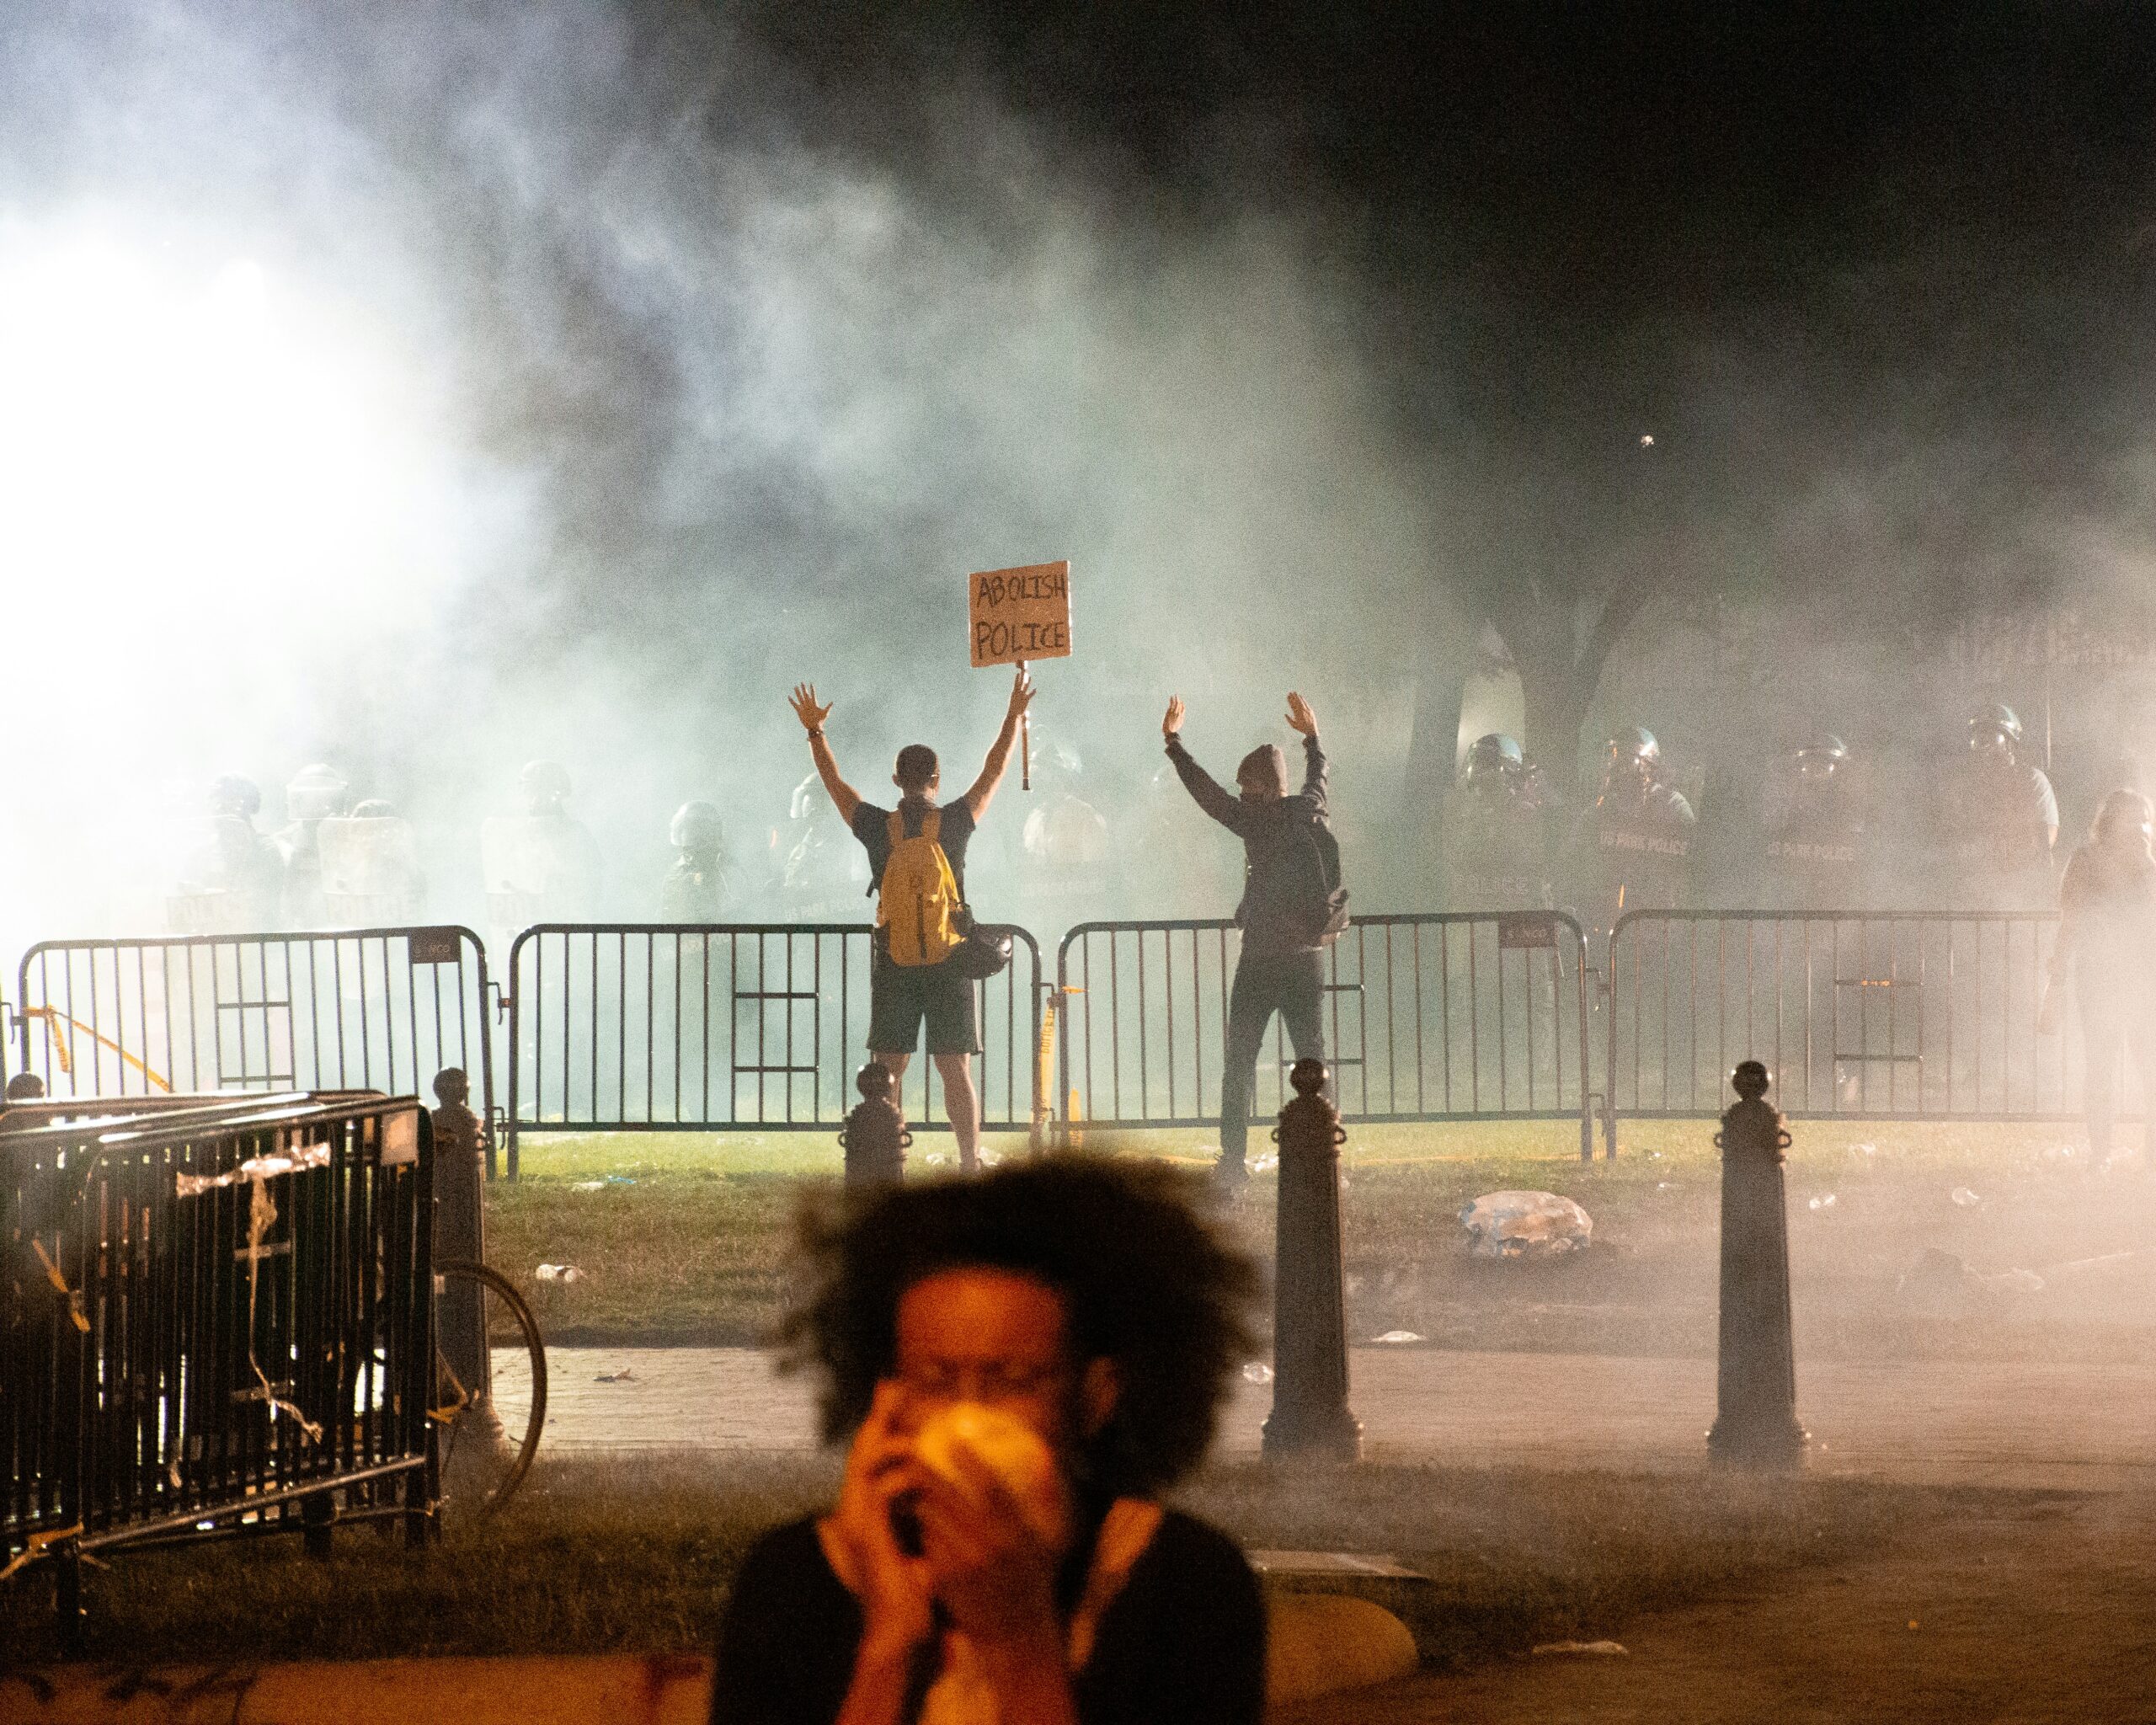 A protest with tear gas in the air. One protester is holding a mask to her face to avoid breathing in the gas. Two protesters in the background have their hands raised, one holds a sign that says 